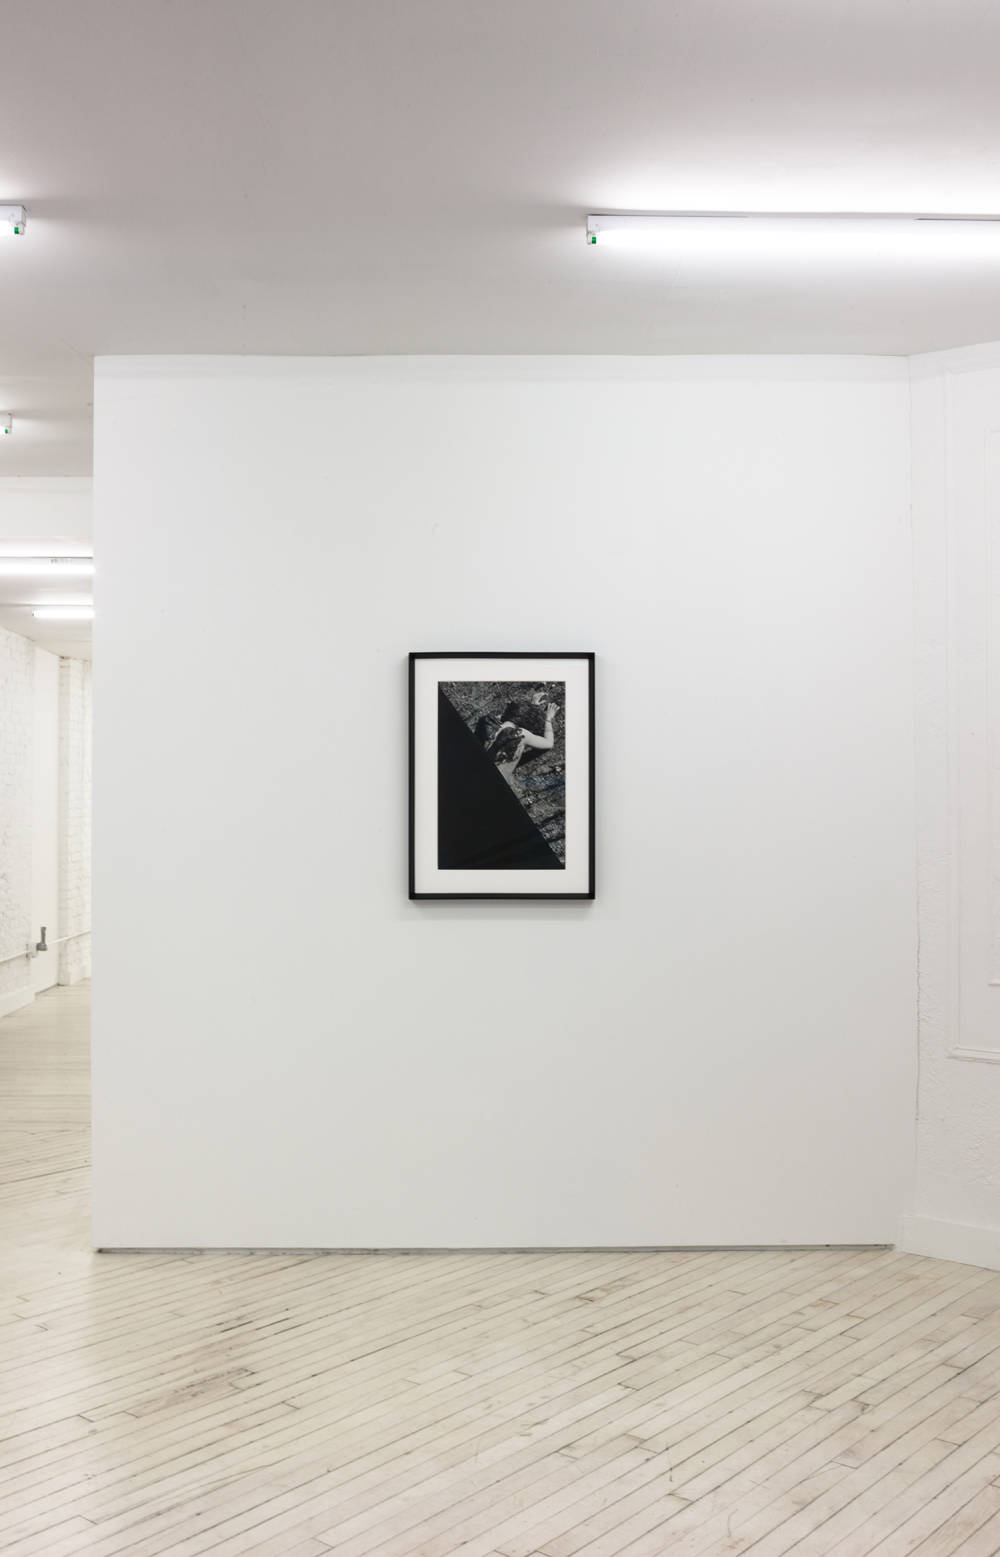 Image of the front gallery, a black and white framed photo hangs center on the wall. The photo has the bottom left triangular totally black and coming out from under that is a soiled body face down in the mud.